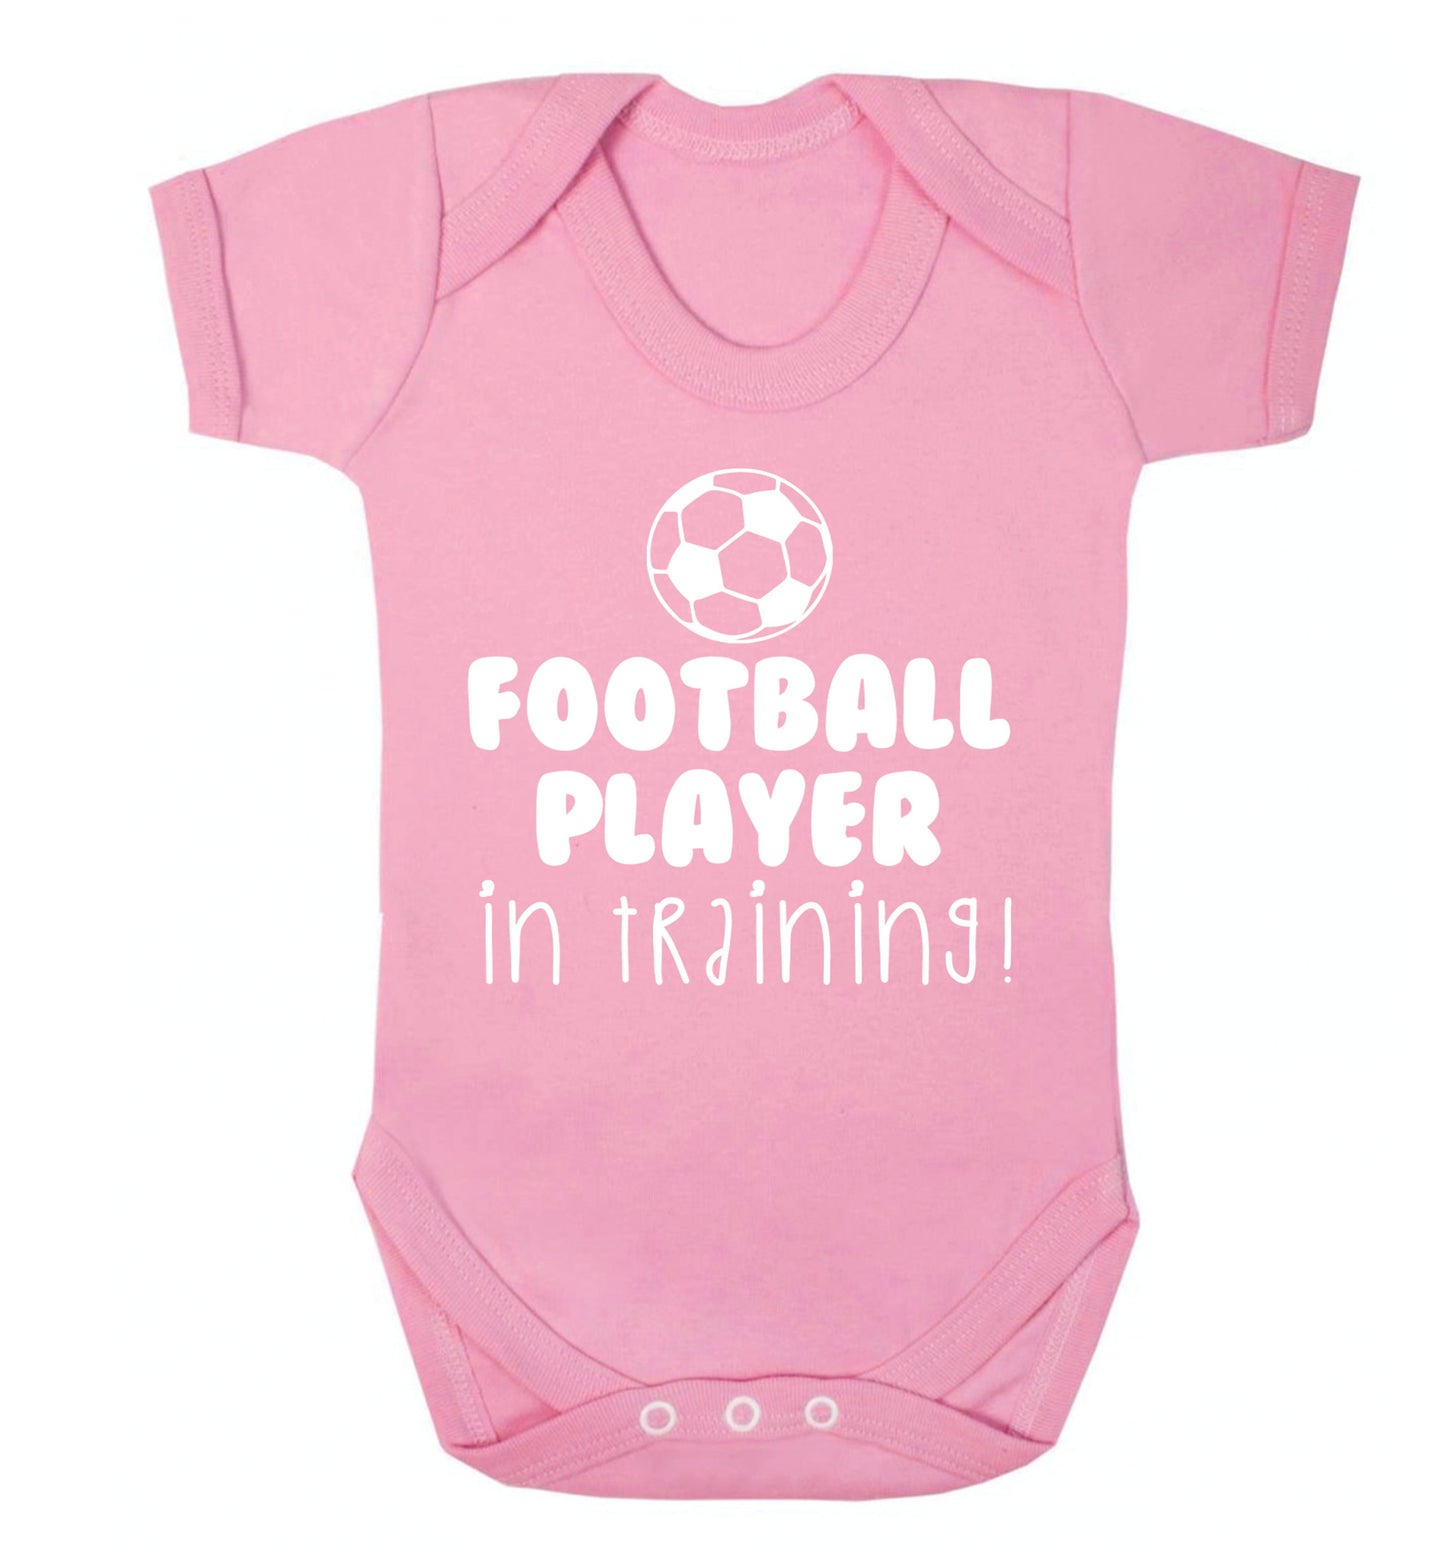 Football player in training Baby Vest pale pink 18-24 months